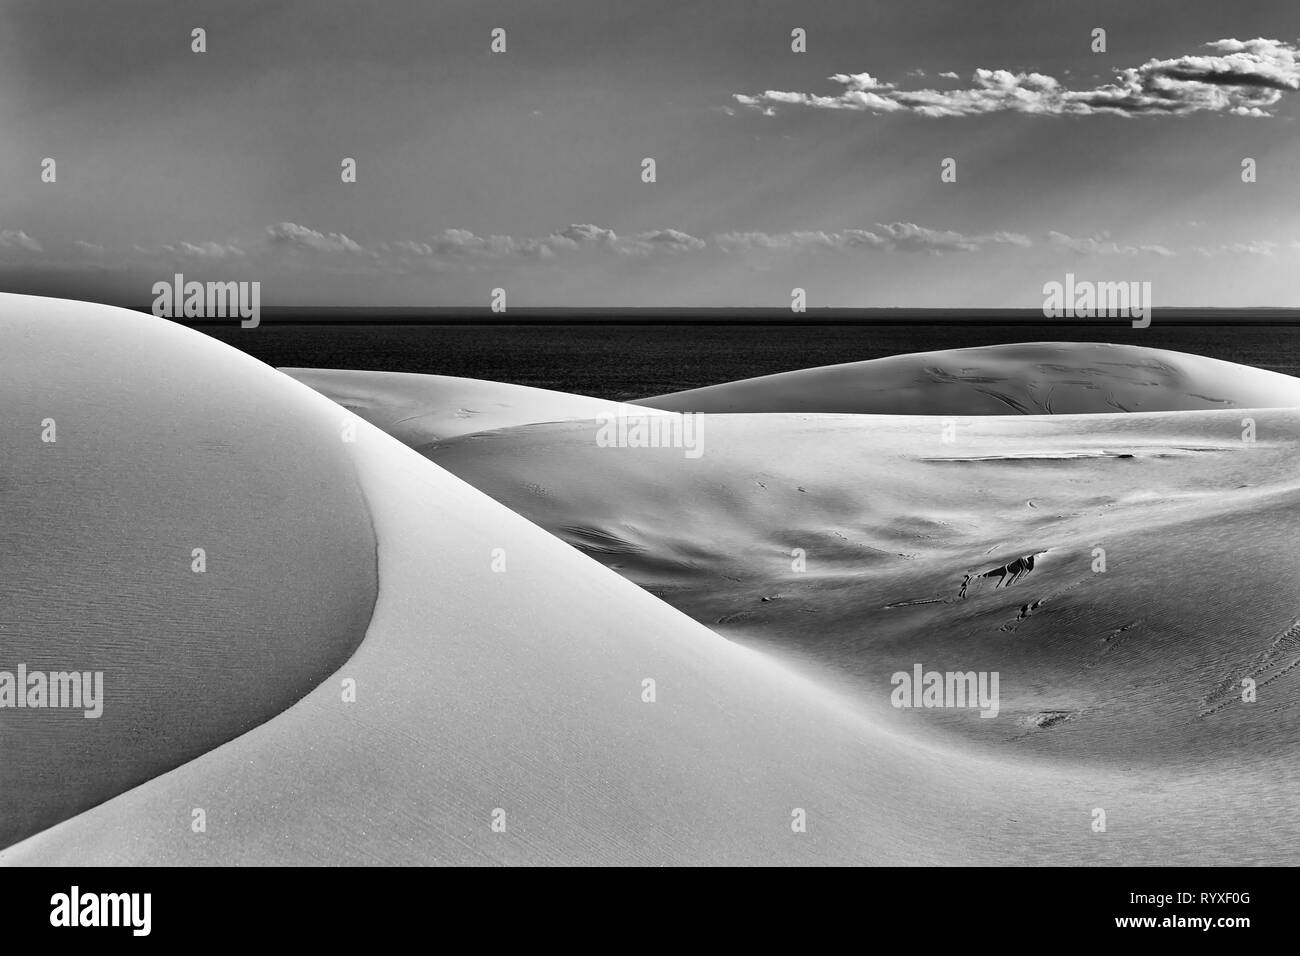 Abstract black-white impression of shapes in Sand Dunes at Stockon beach on Pacific coast, Australia. High contrast smooth lines formed by natural win Stock Photo